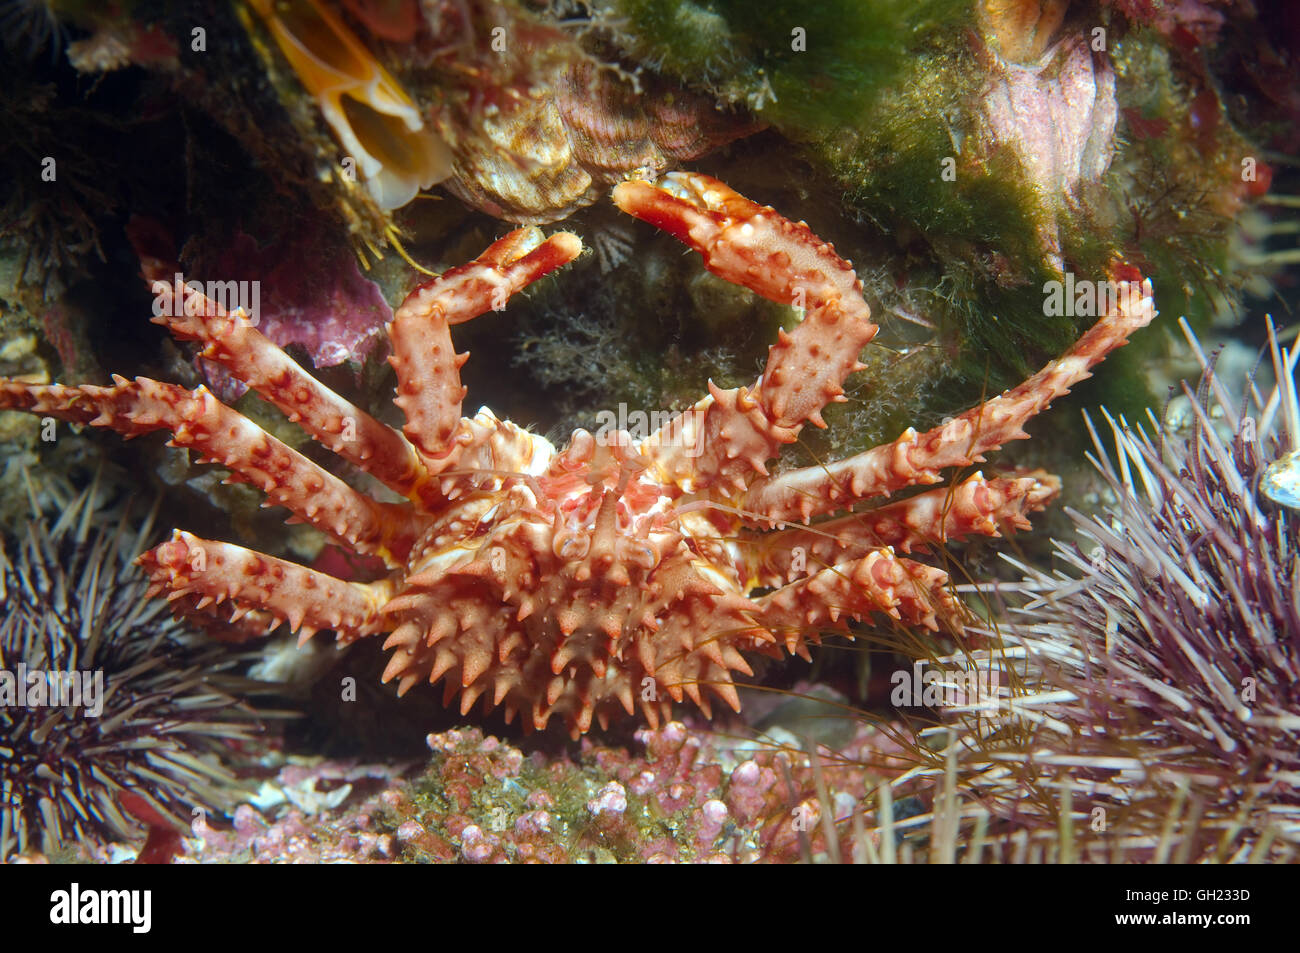 Baby Red king granchio, Kamchatka crab o Alaskan granchio reale (Paralithodes camtschaticus) Mare di Barents, Arctique russo Foto Stock